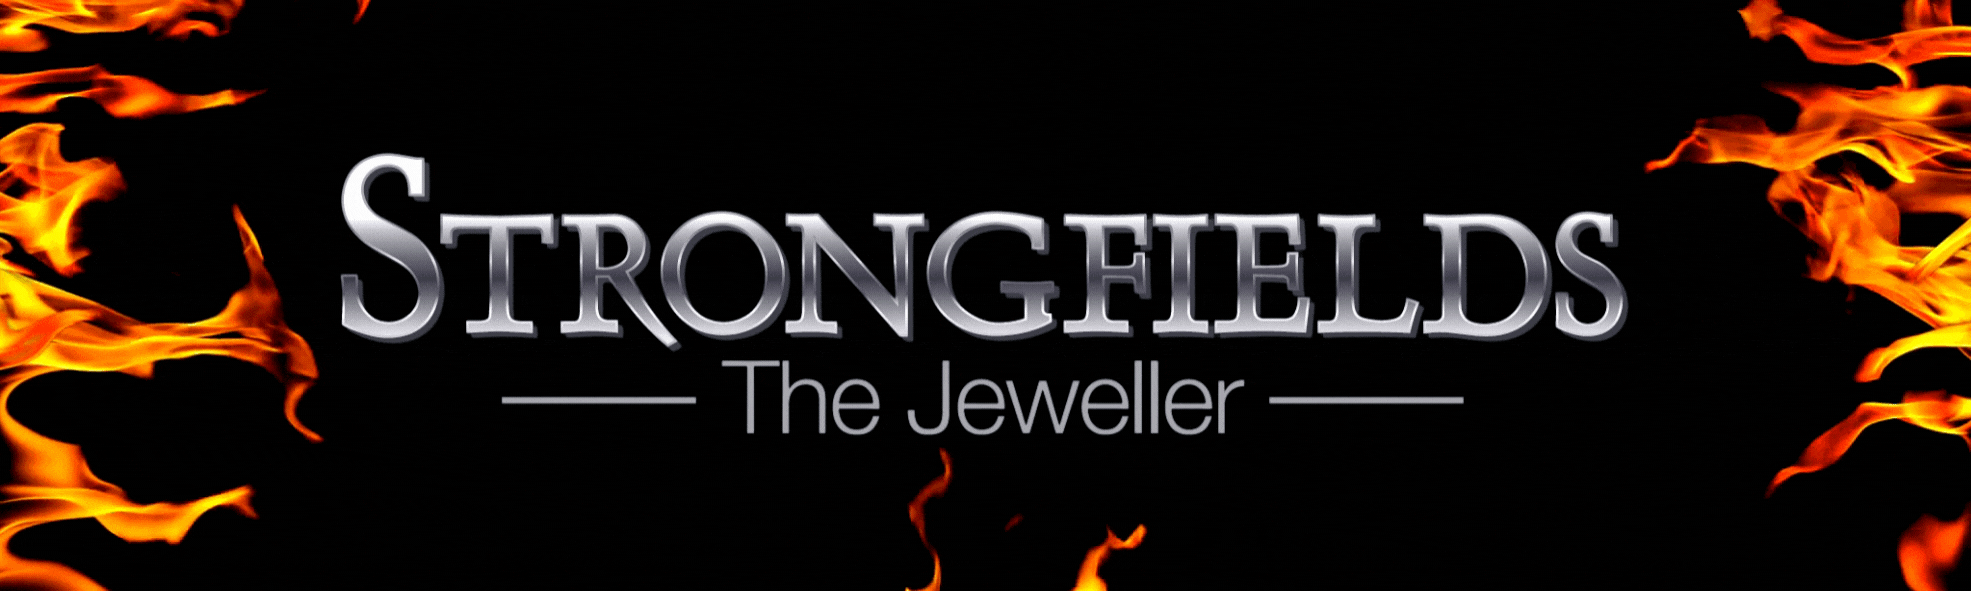 strongfields the jeweller logo with moving flames in background 